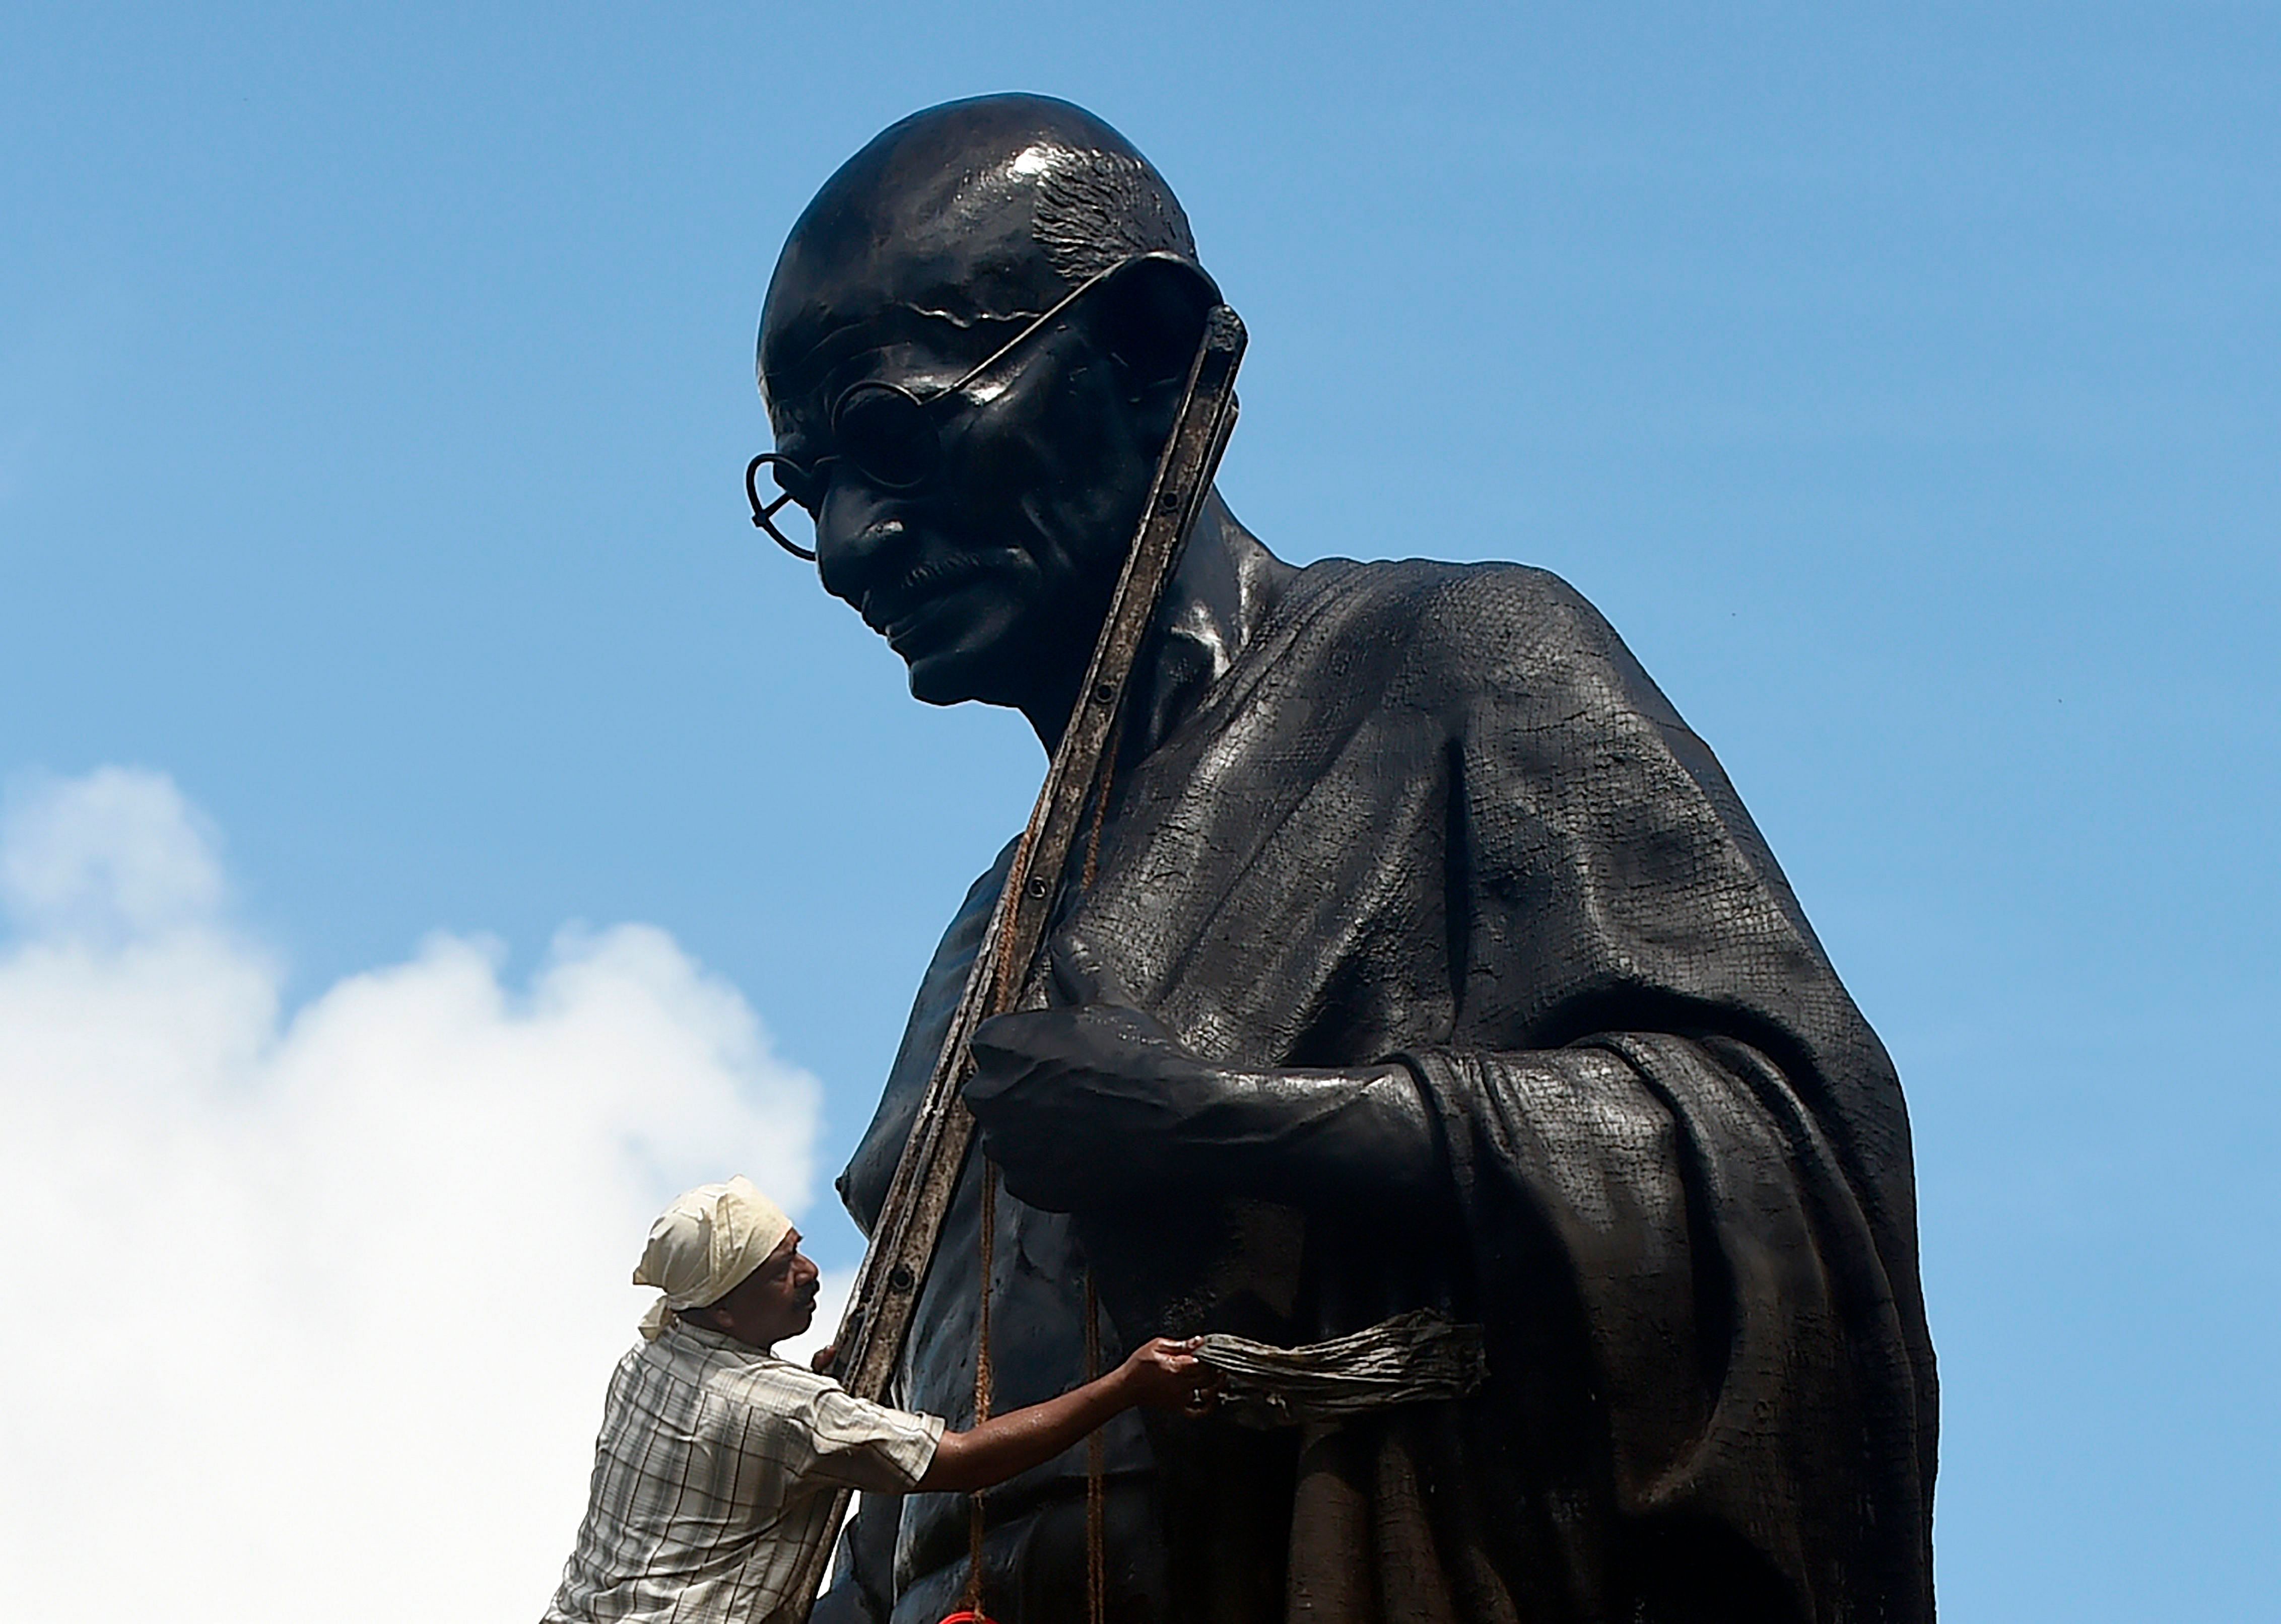 A worker cleans a statue of Mahatma Gandhi in Mumbai on October 1, 2019, ahead of Gandhi's 150th birth anniversary. (AFP Photo)